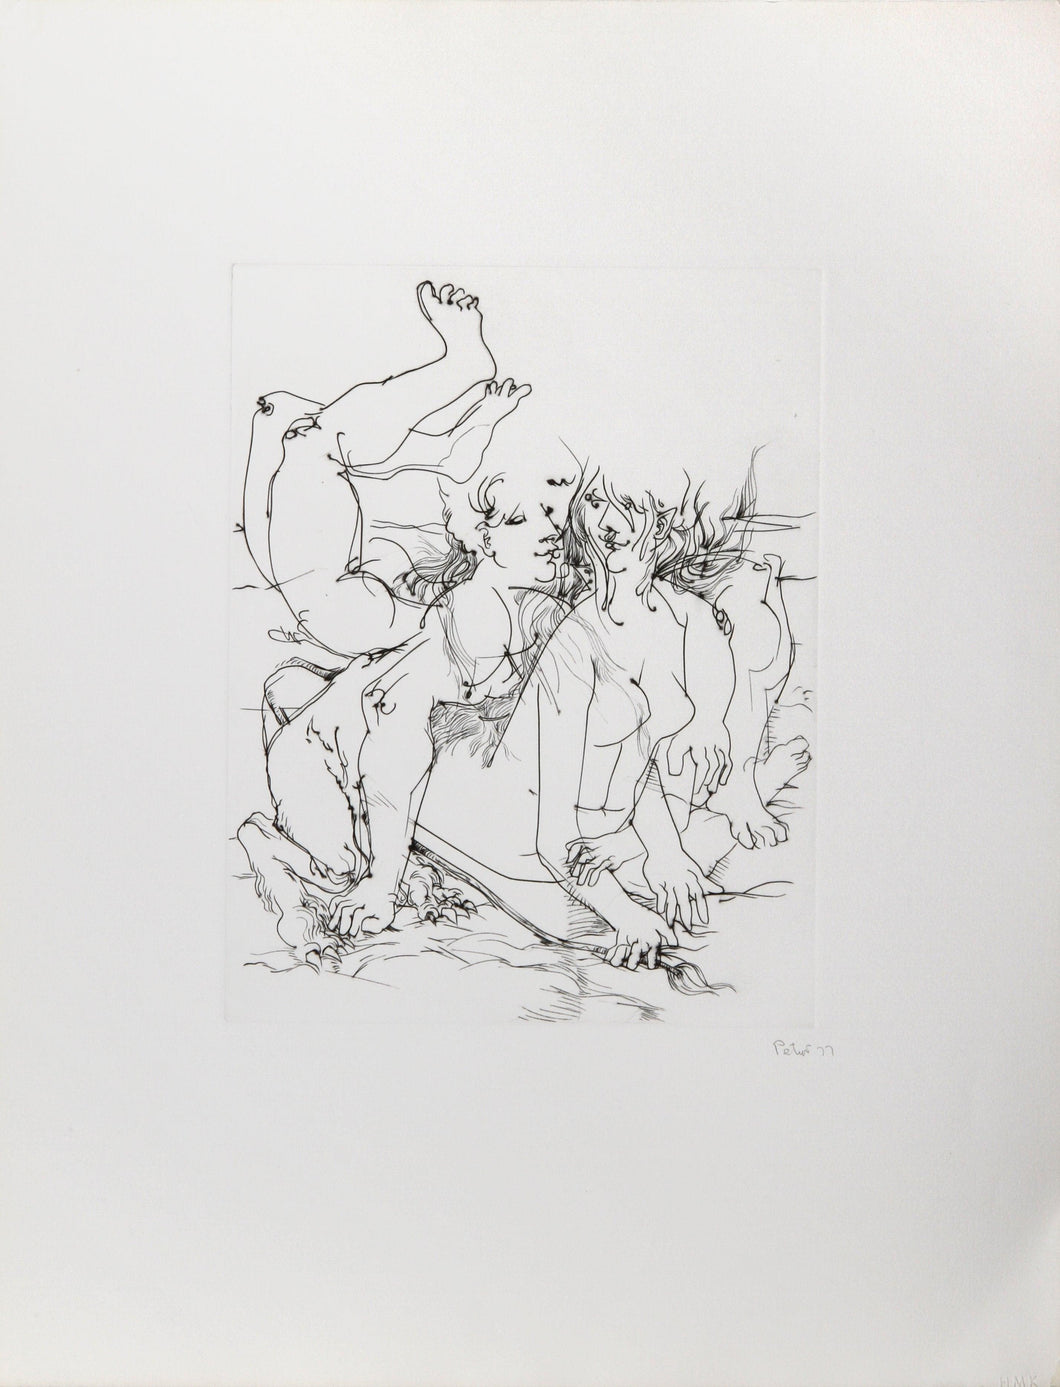 Mythical Creatures VI Etching | Dimitri Petrov,{{product.type}}